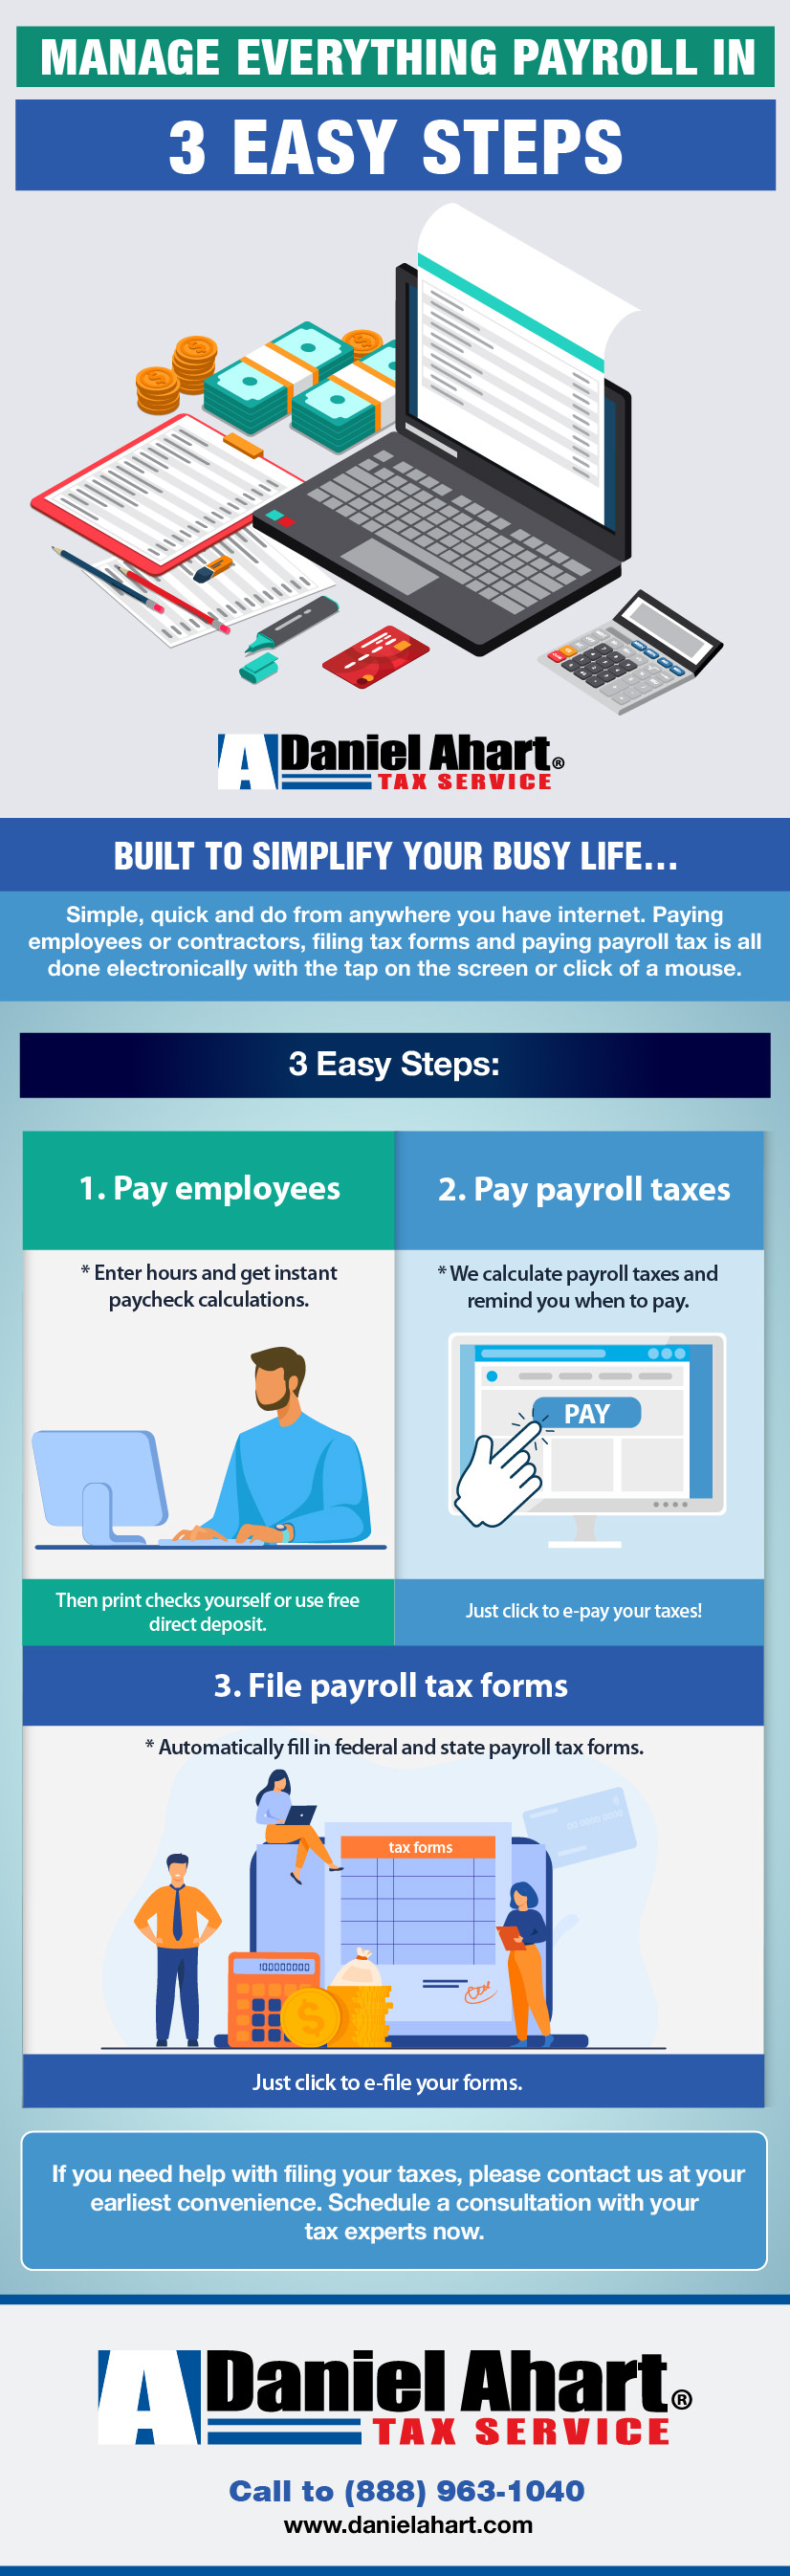 Manage everything payroll in 3 easy steps - Daniel Ahart